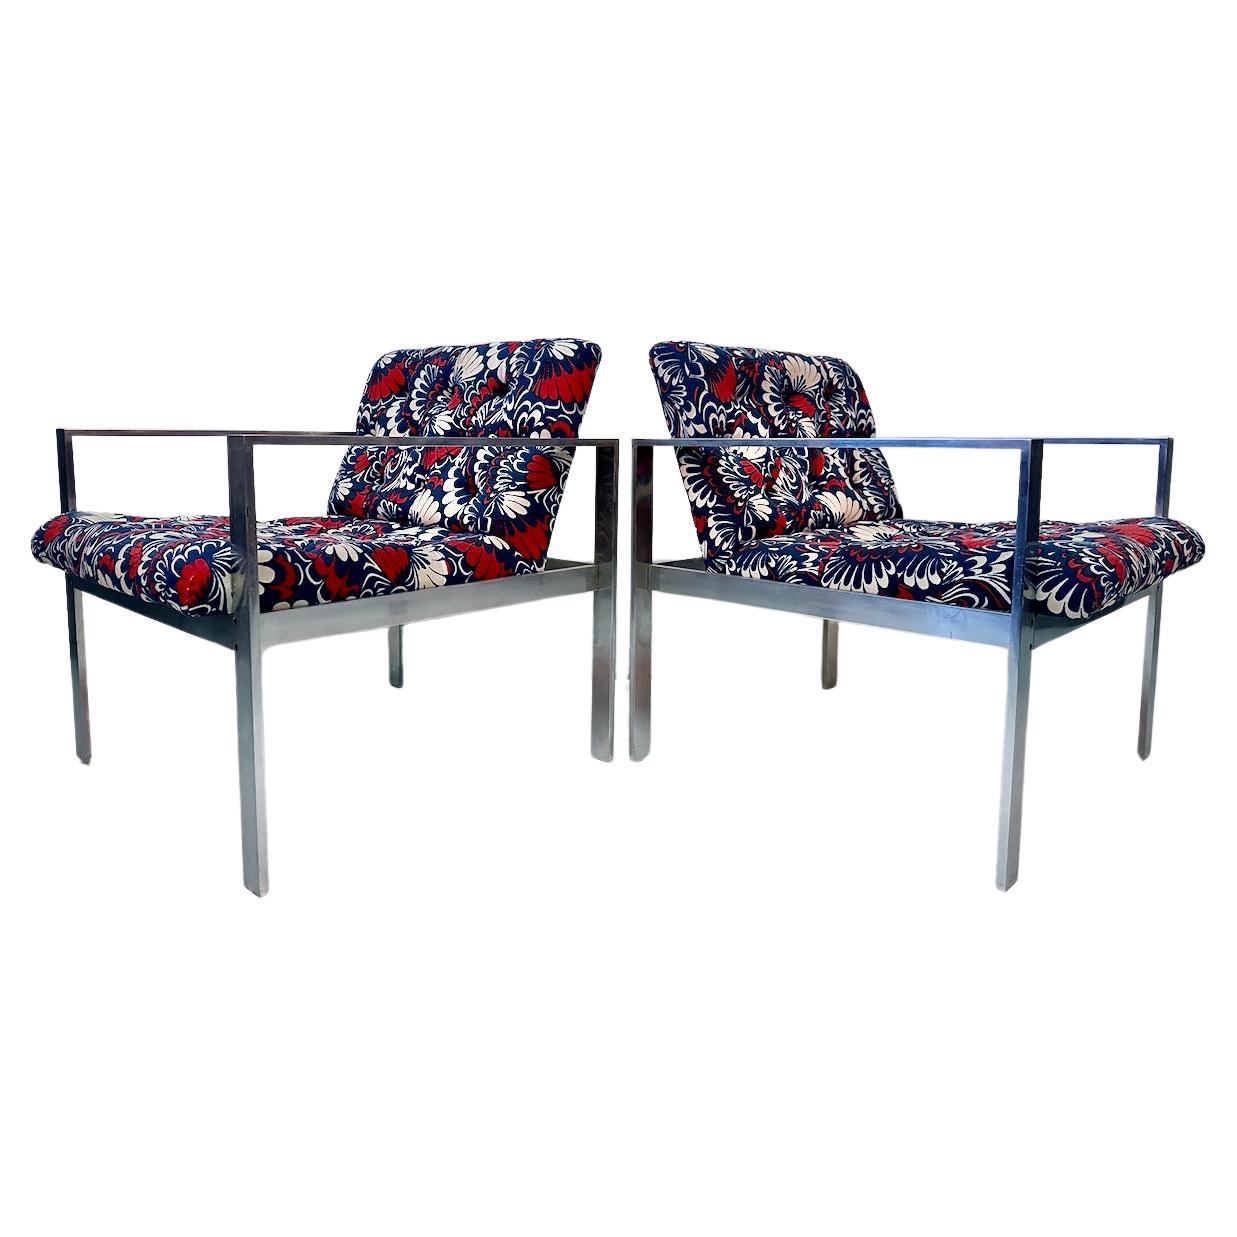 Pair of Harvey Probber Solid Bar Aluminum Lounge Chairs, 1960's For Sale